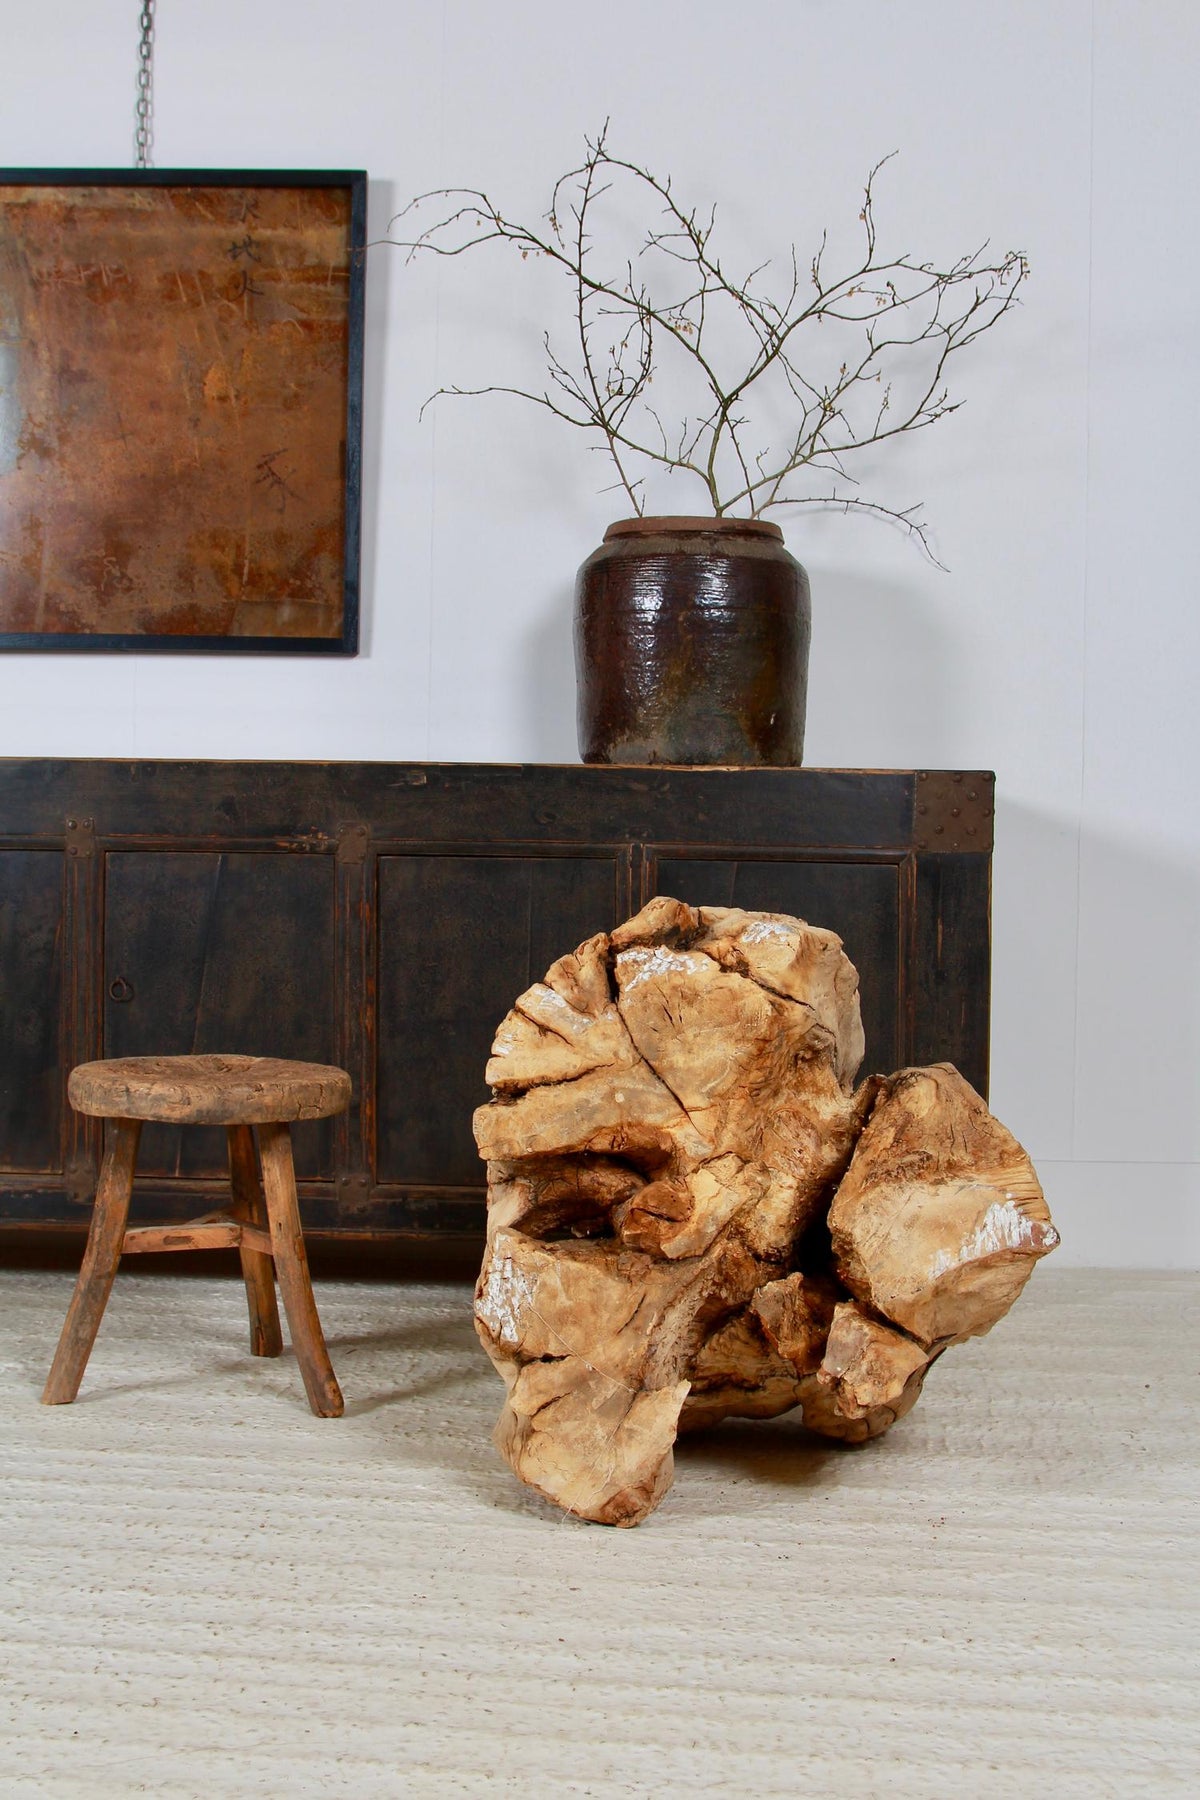 A Huge Organically-Shaped Gnarly Elm Tree  Stump & Root Coffee Table